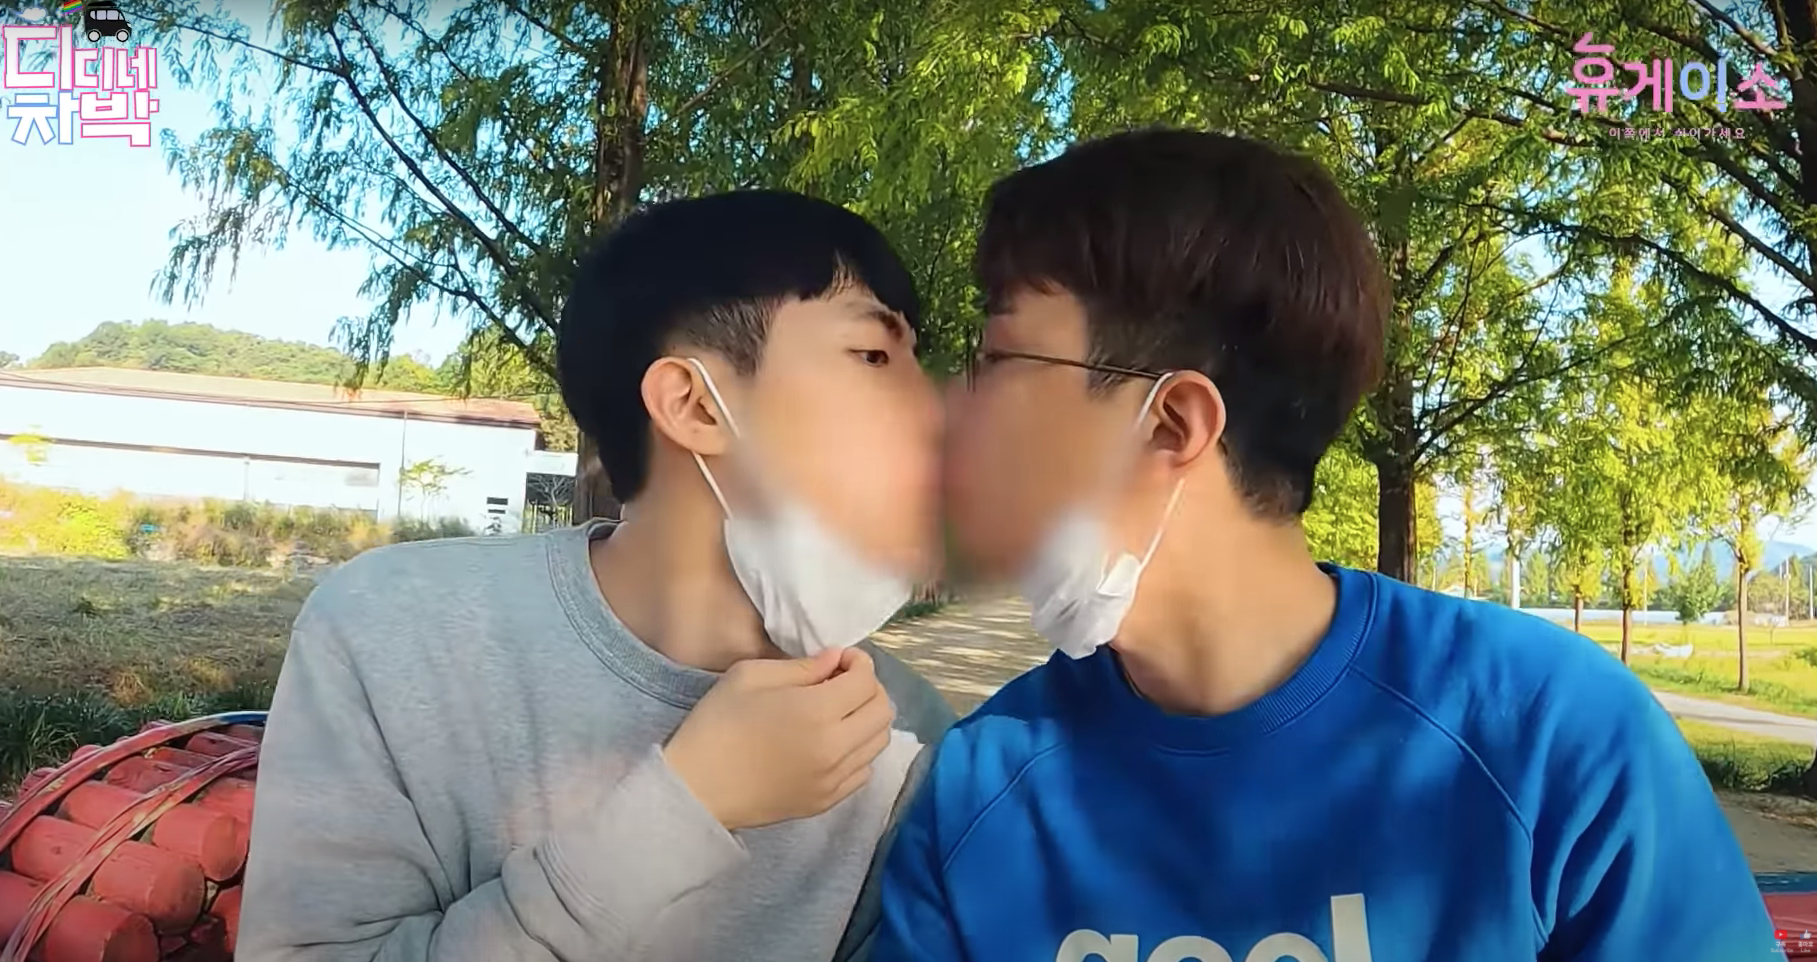 Meet the queer Korean couples vlogging their lives together